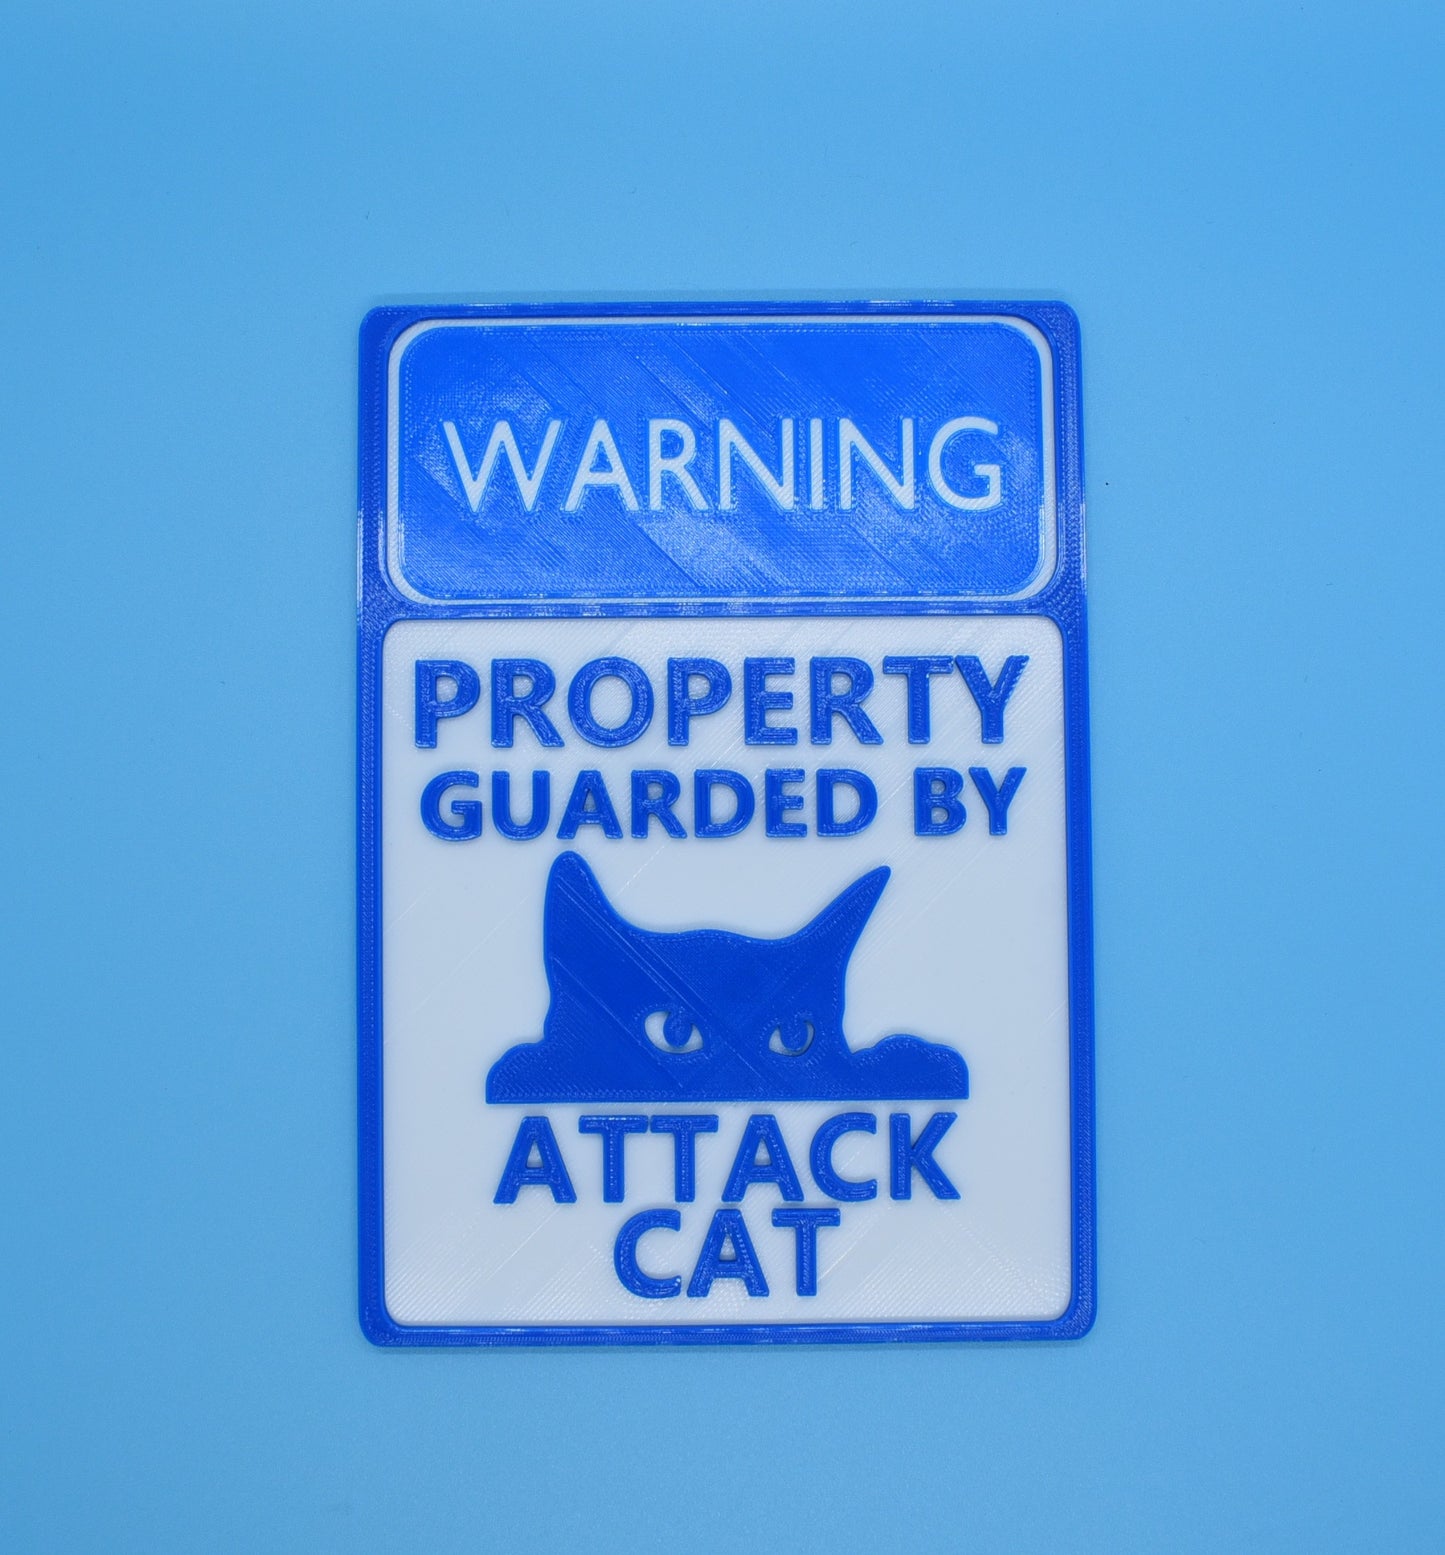 Attack CAT "WARNING" Guarded by - 3D printed sign